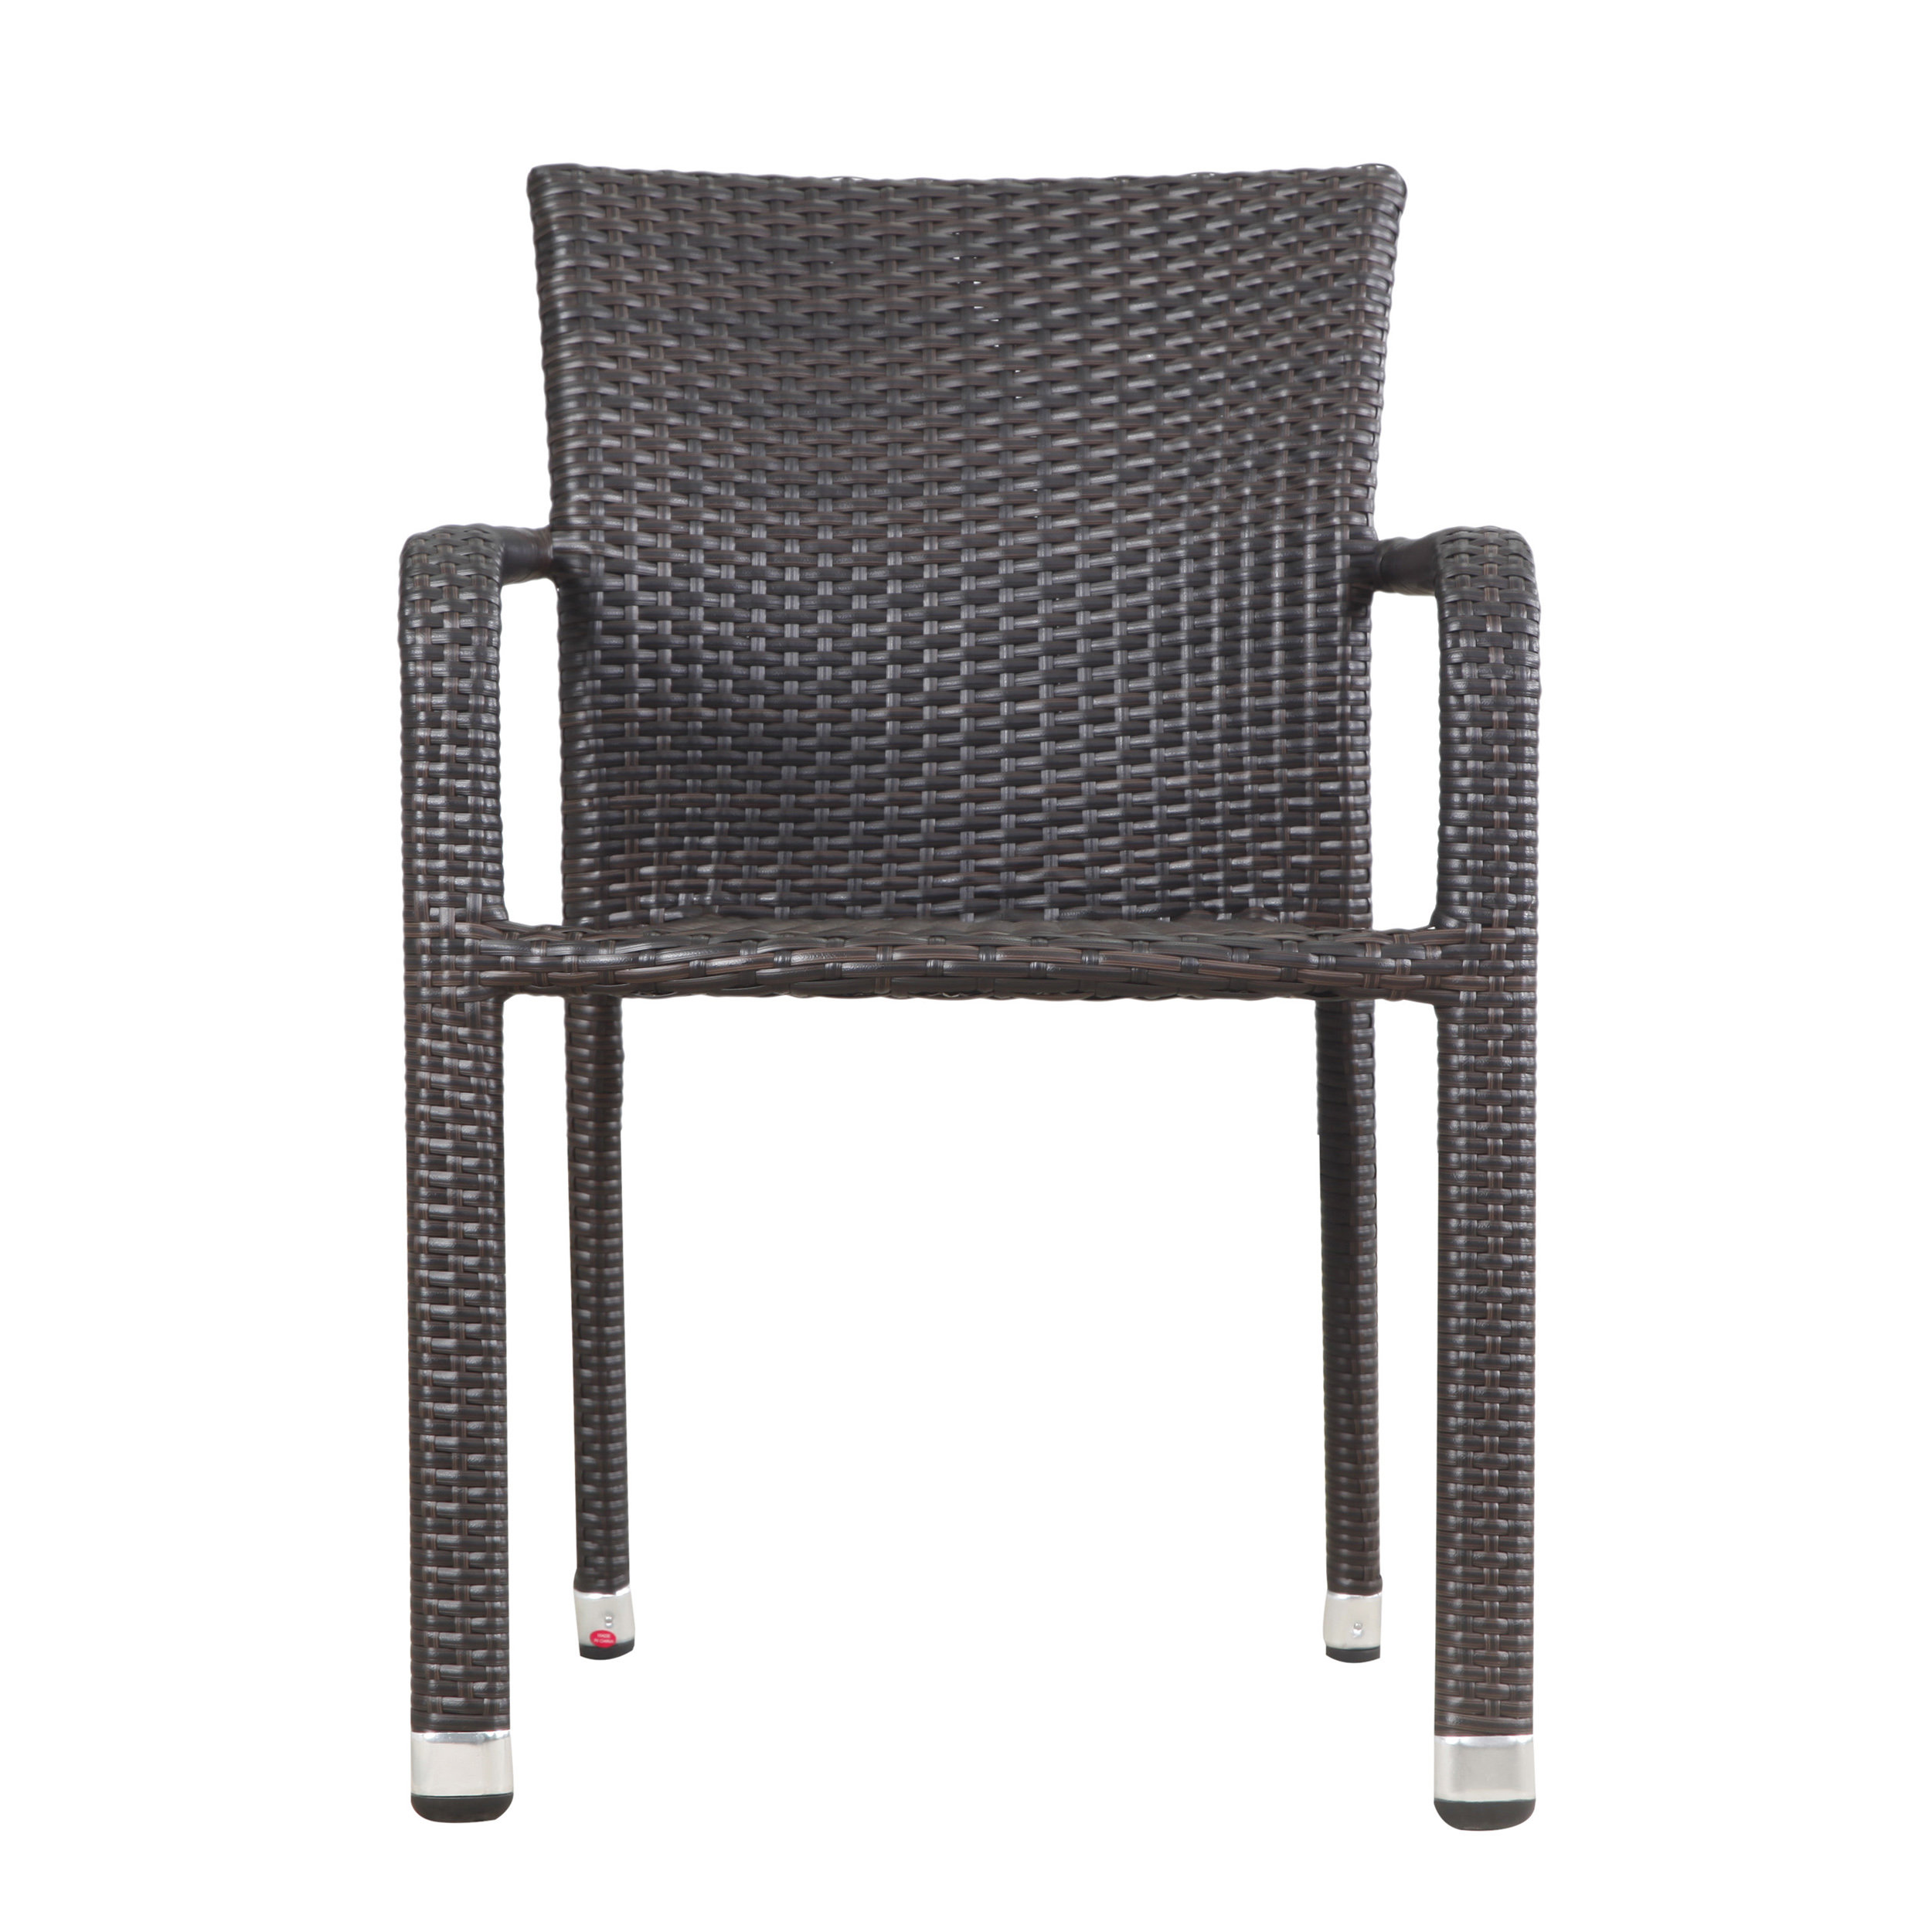 Brown Wicker Rattan Patio Dining Chairs You Ll Love In 2021 Wayfair